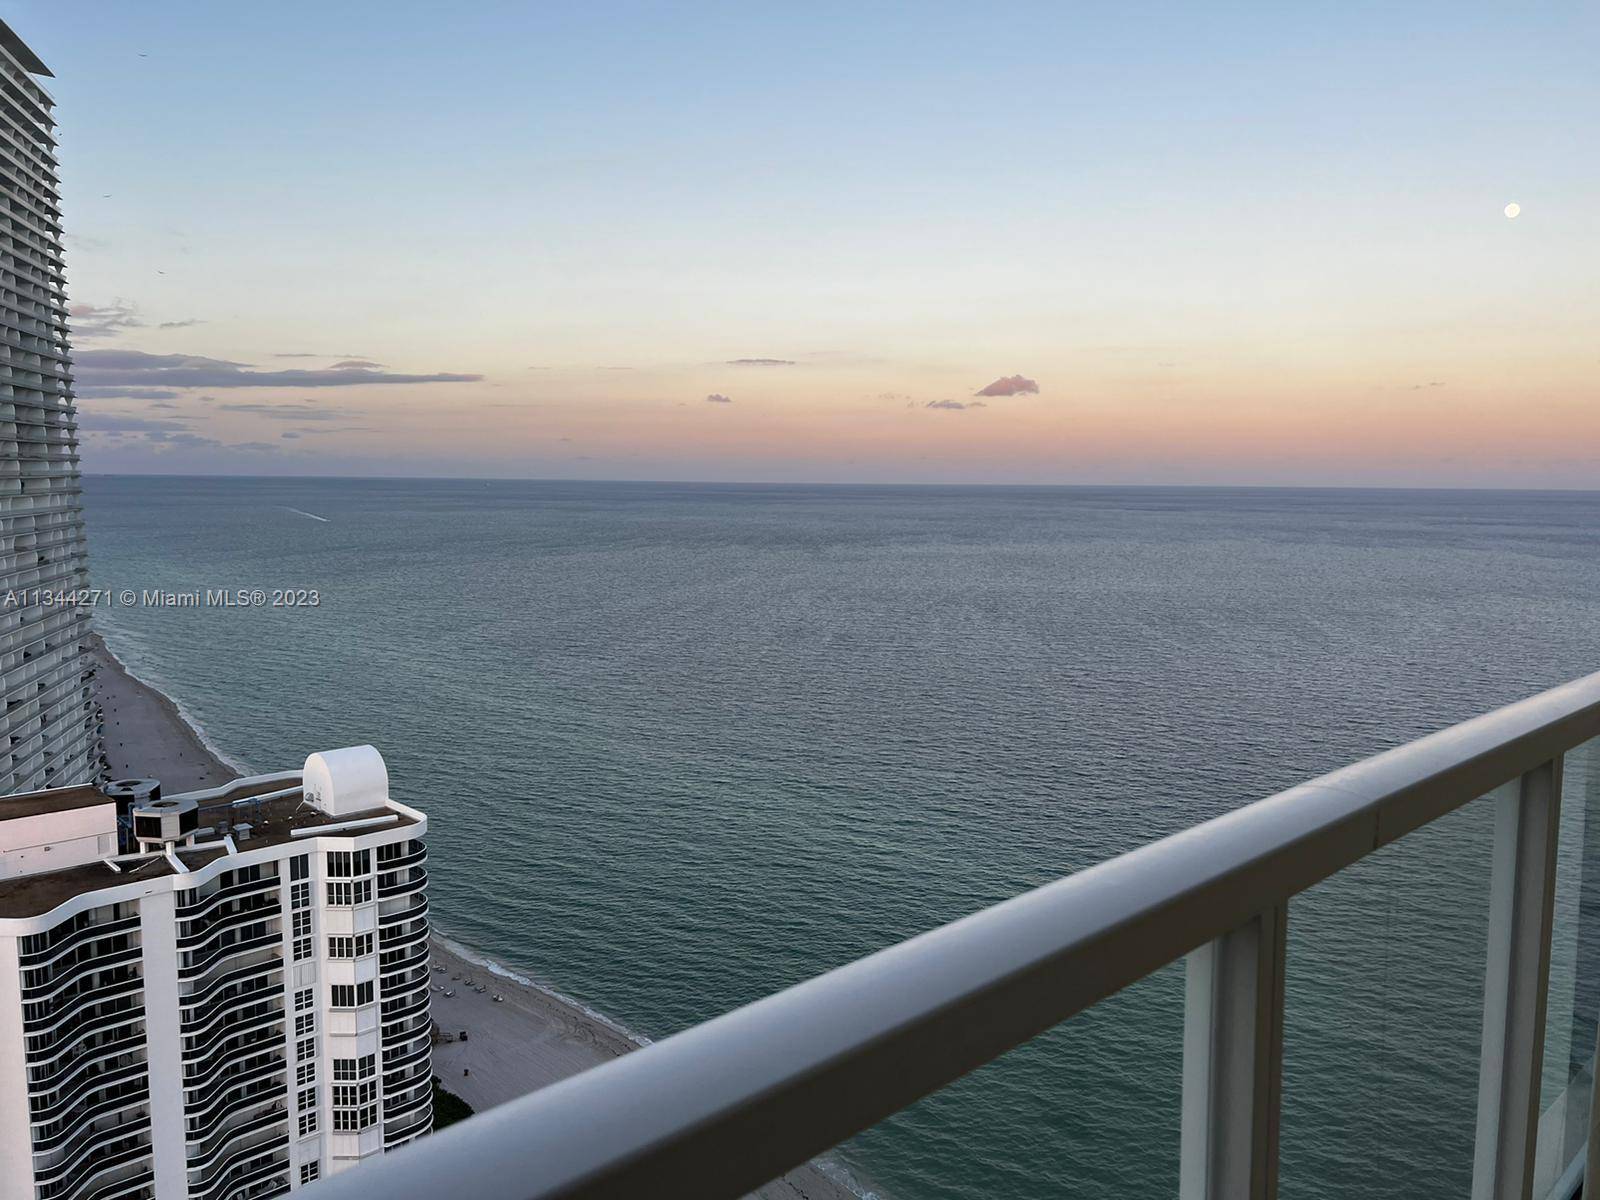 Sunny Isles Beach. Newly updated 2 Bedrooms plus DEN or third bedroom 2.